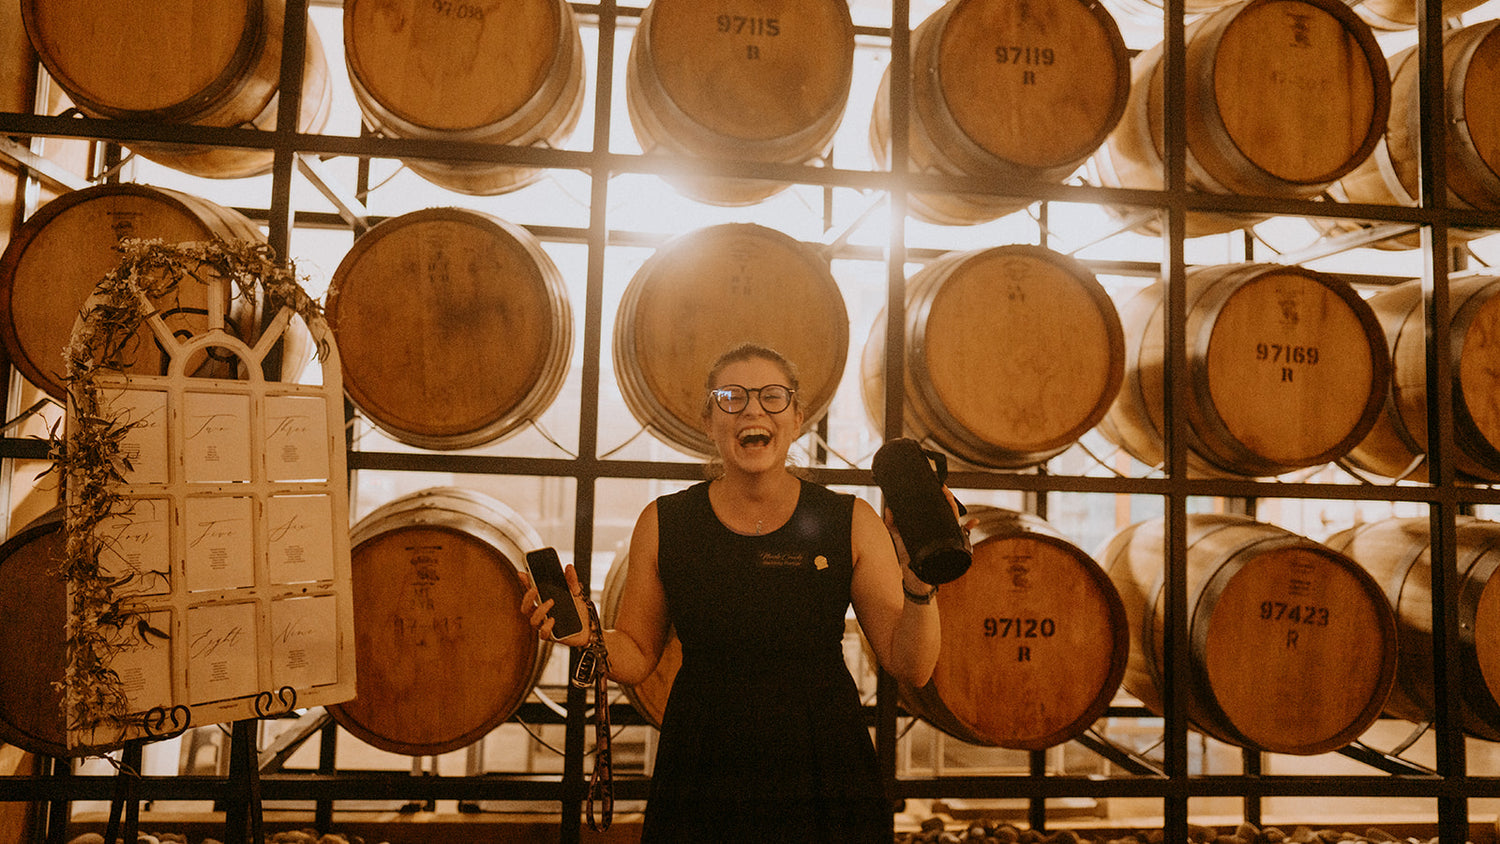 Nicole in a black dress laughing in front of a wall of wine barrels